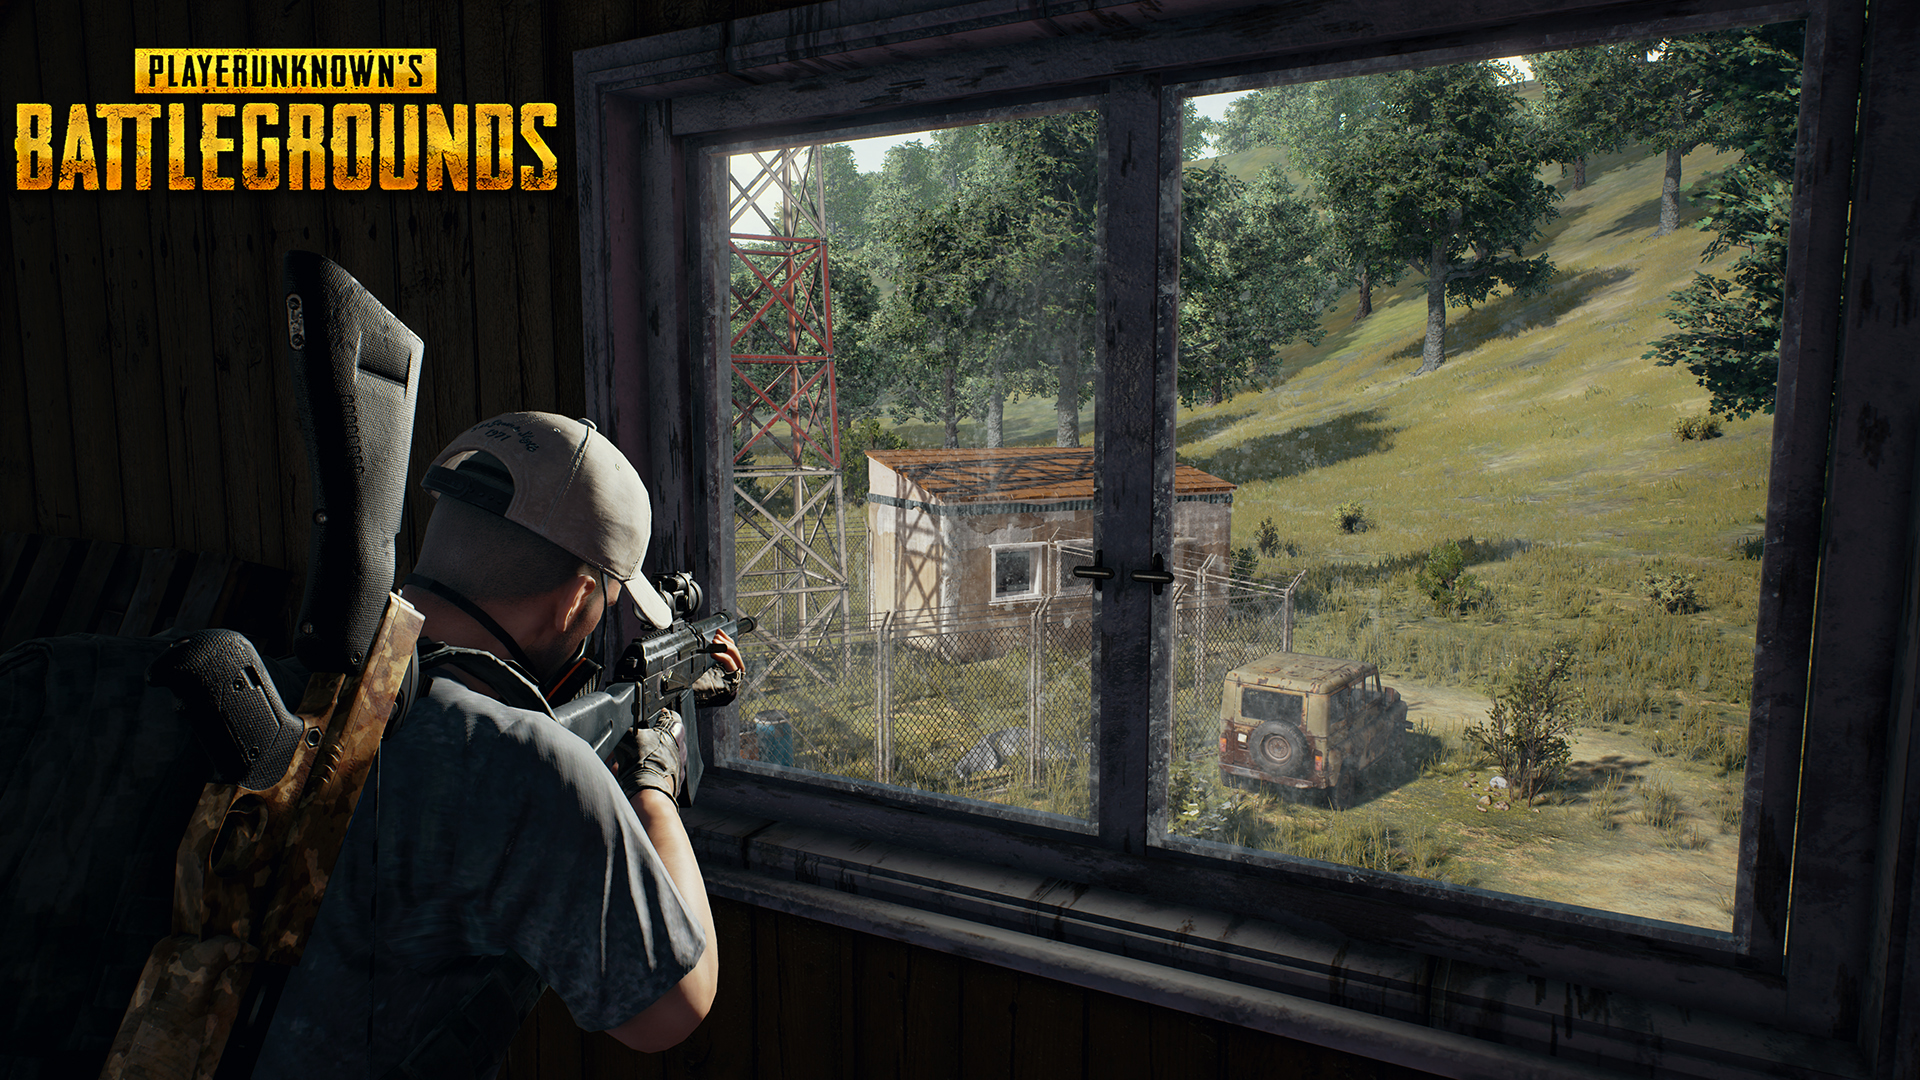 Video Game PlayerUnknown's Battlegrounds HD Wallpaper | Background Image